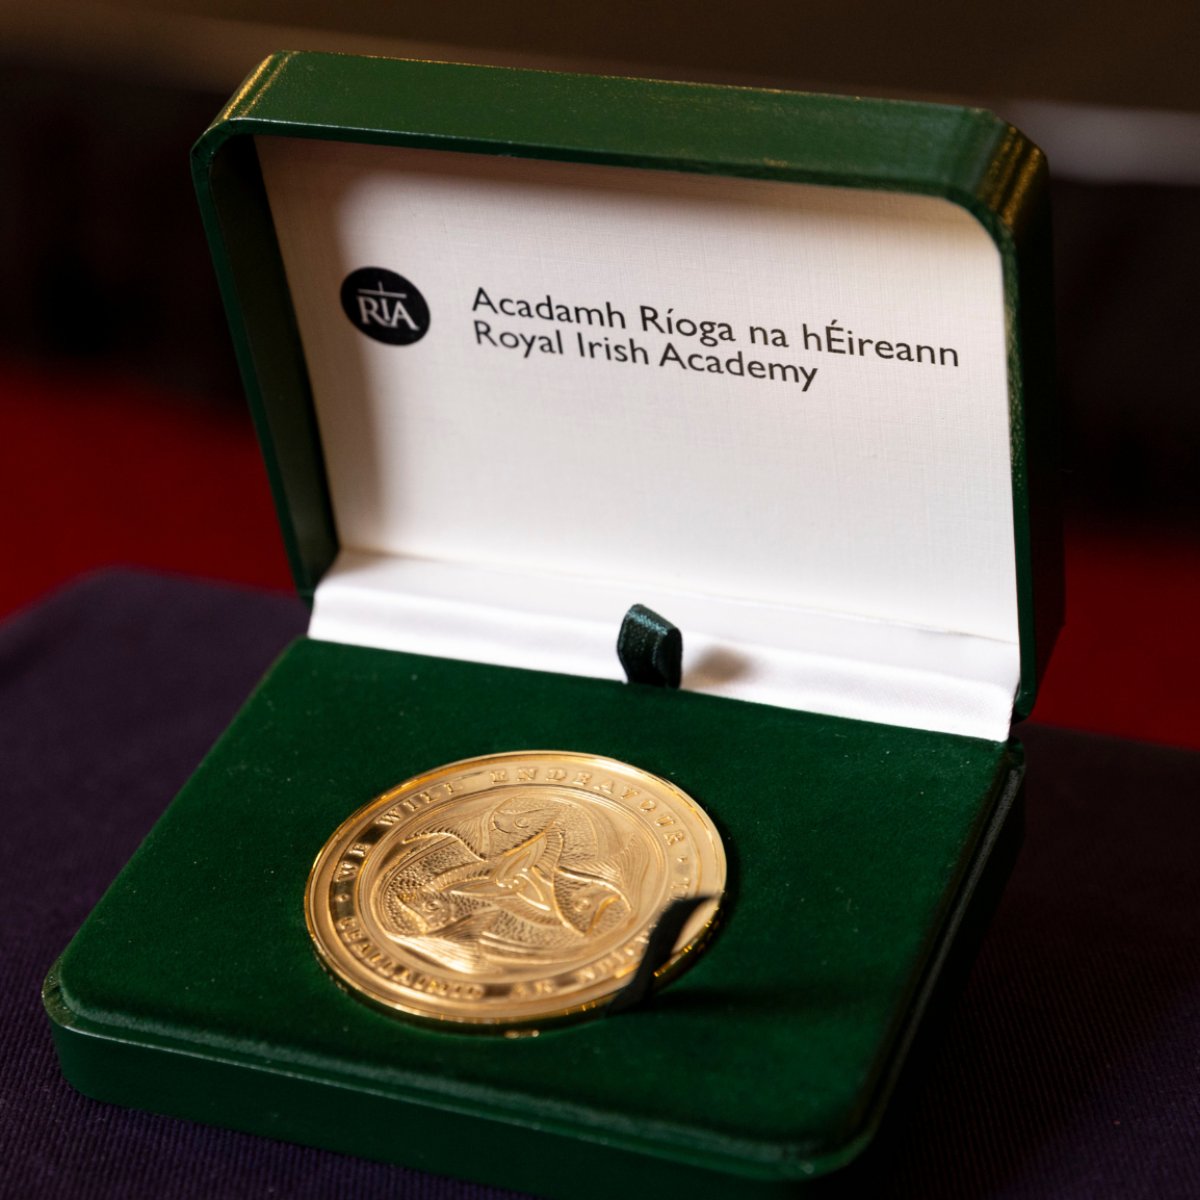 The 2025 #RIAGoldMedals are open for nominations until 4 June 2024. Do you know someone making an internationally recognised outstanding scholarly contribution in the Humanities or Life & Medical Sciences fields? Why not nominate them for a Gold Medal: bit.ly/2025RIAGoldMed…